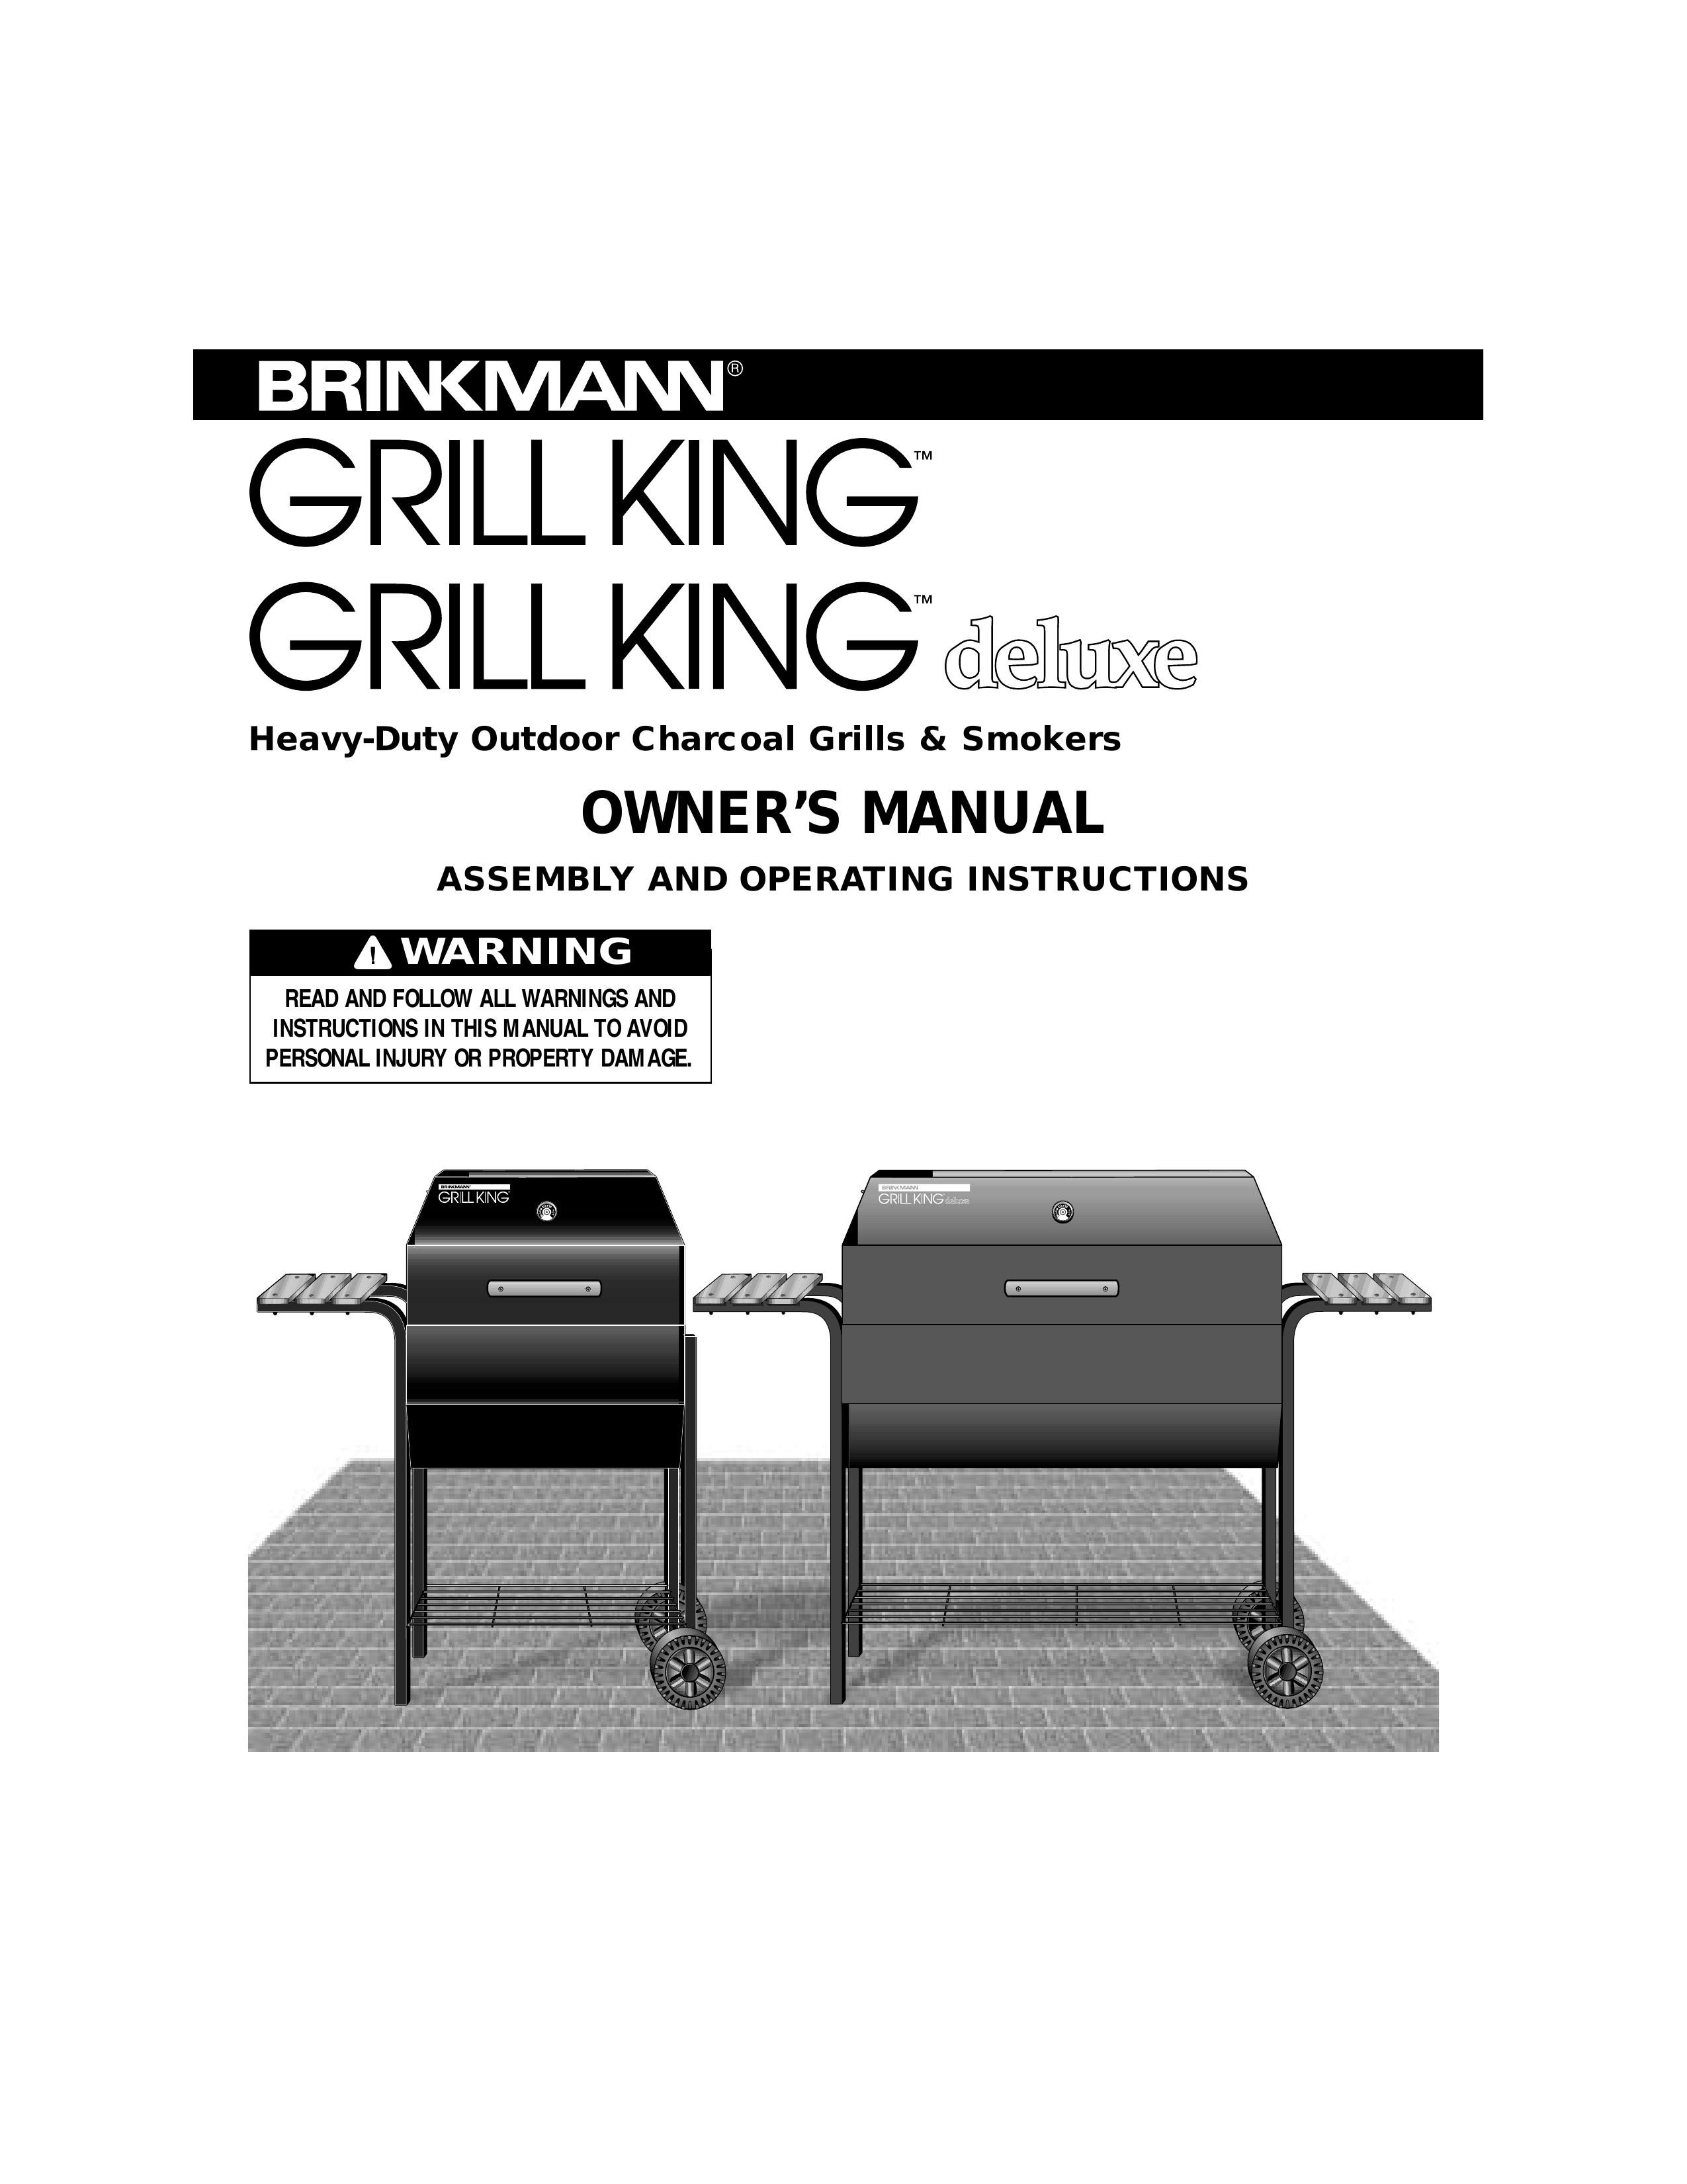 Vent-a-Hood 812-3450-0 (Hickory) Charcoal Grill User Manual